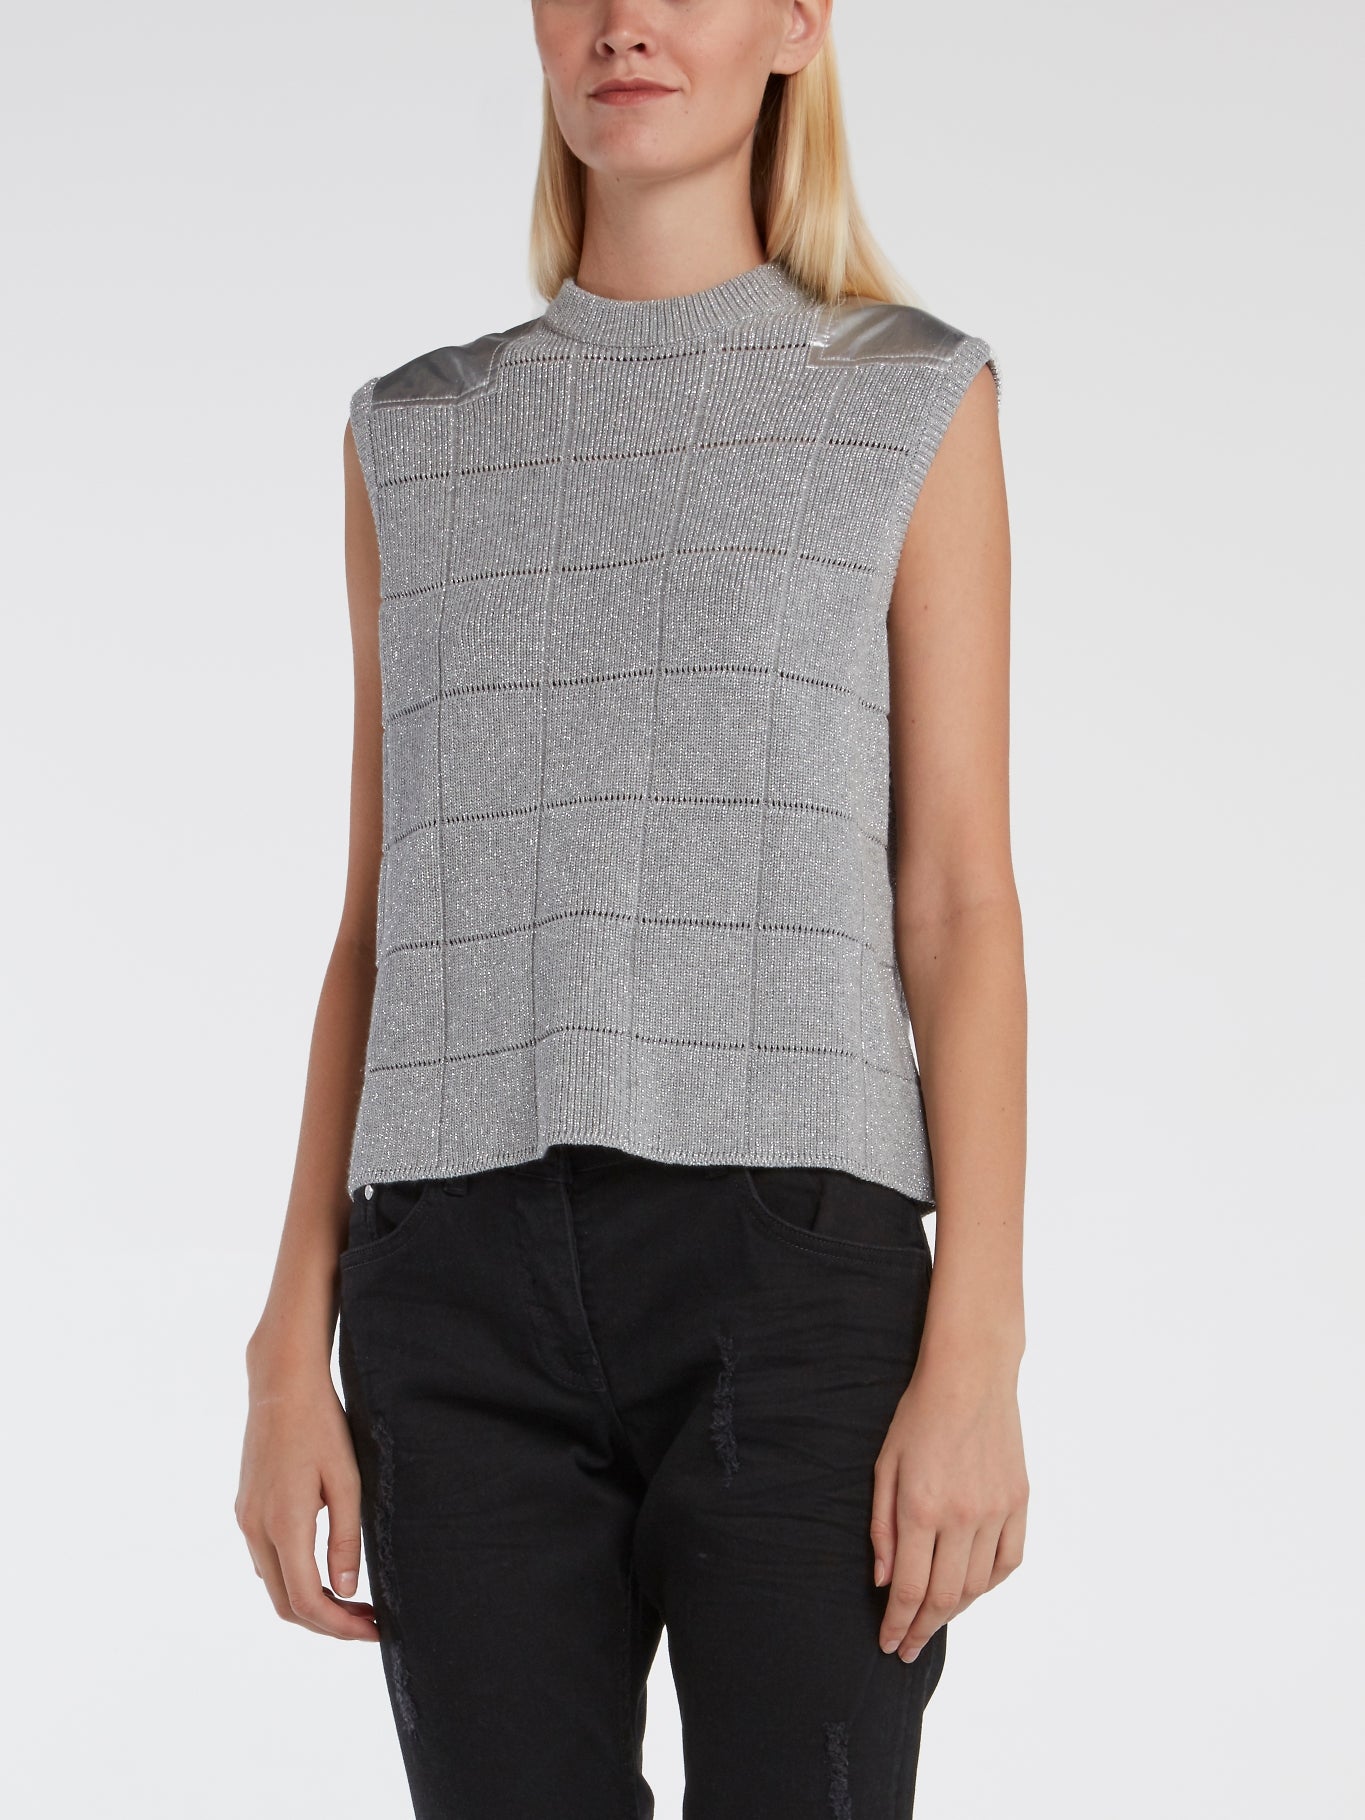 Grey Glittered Knitted Top